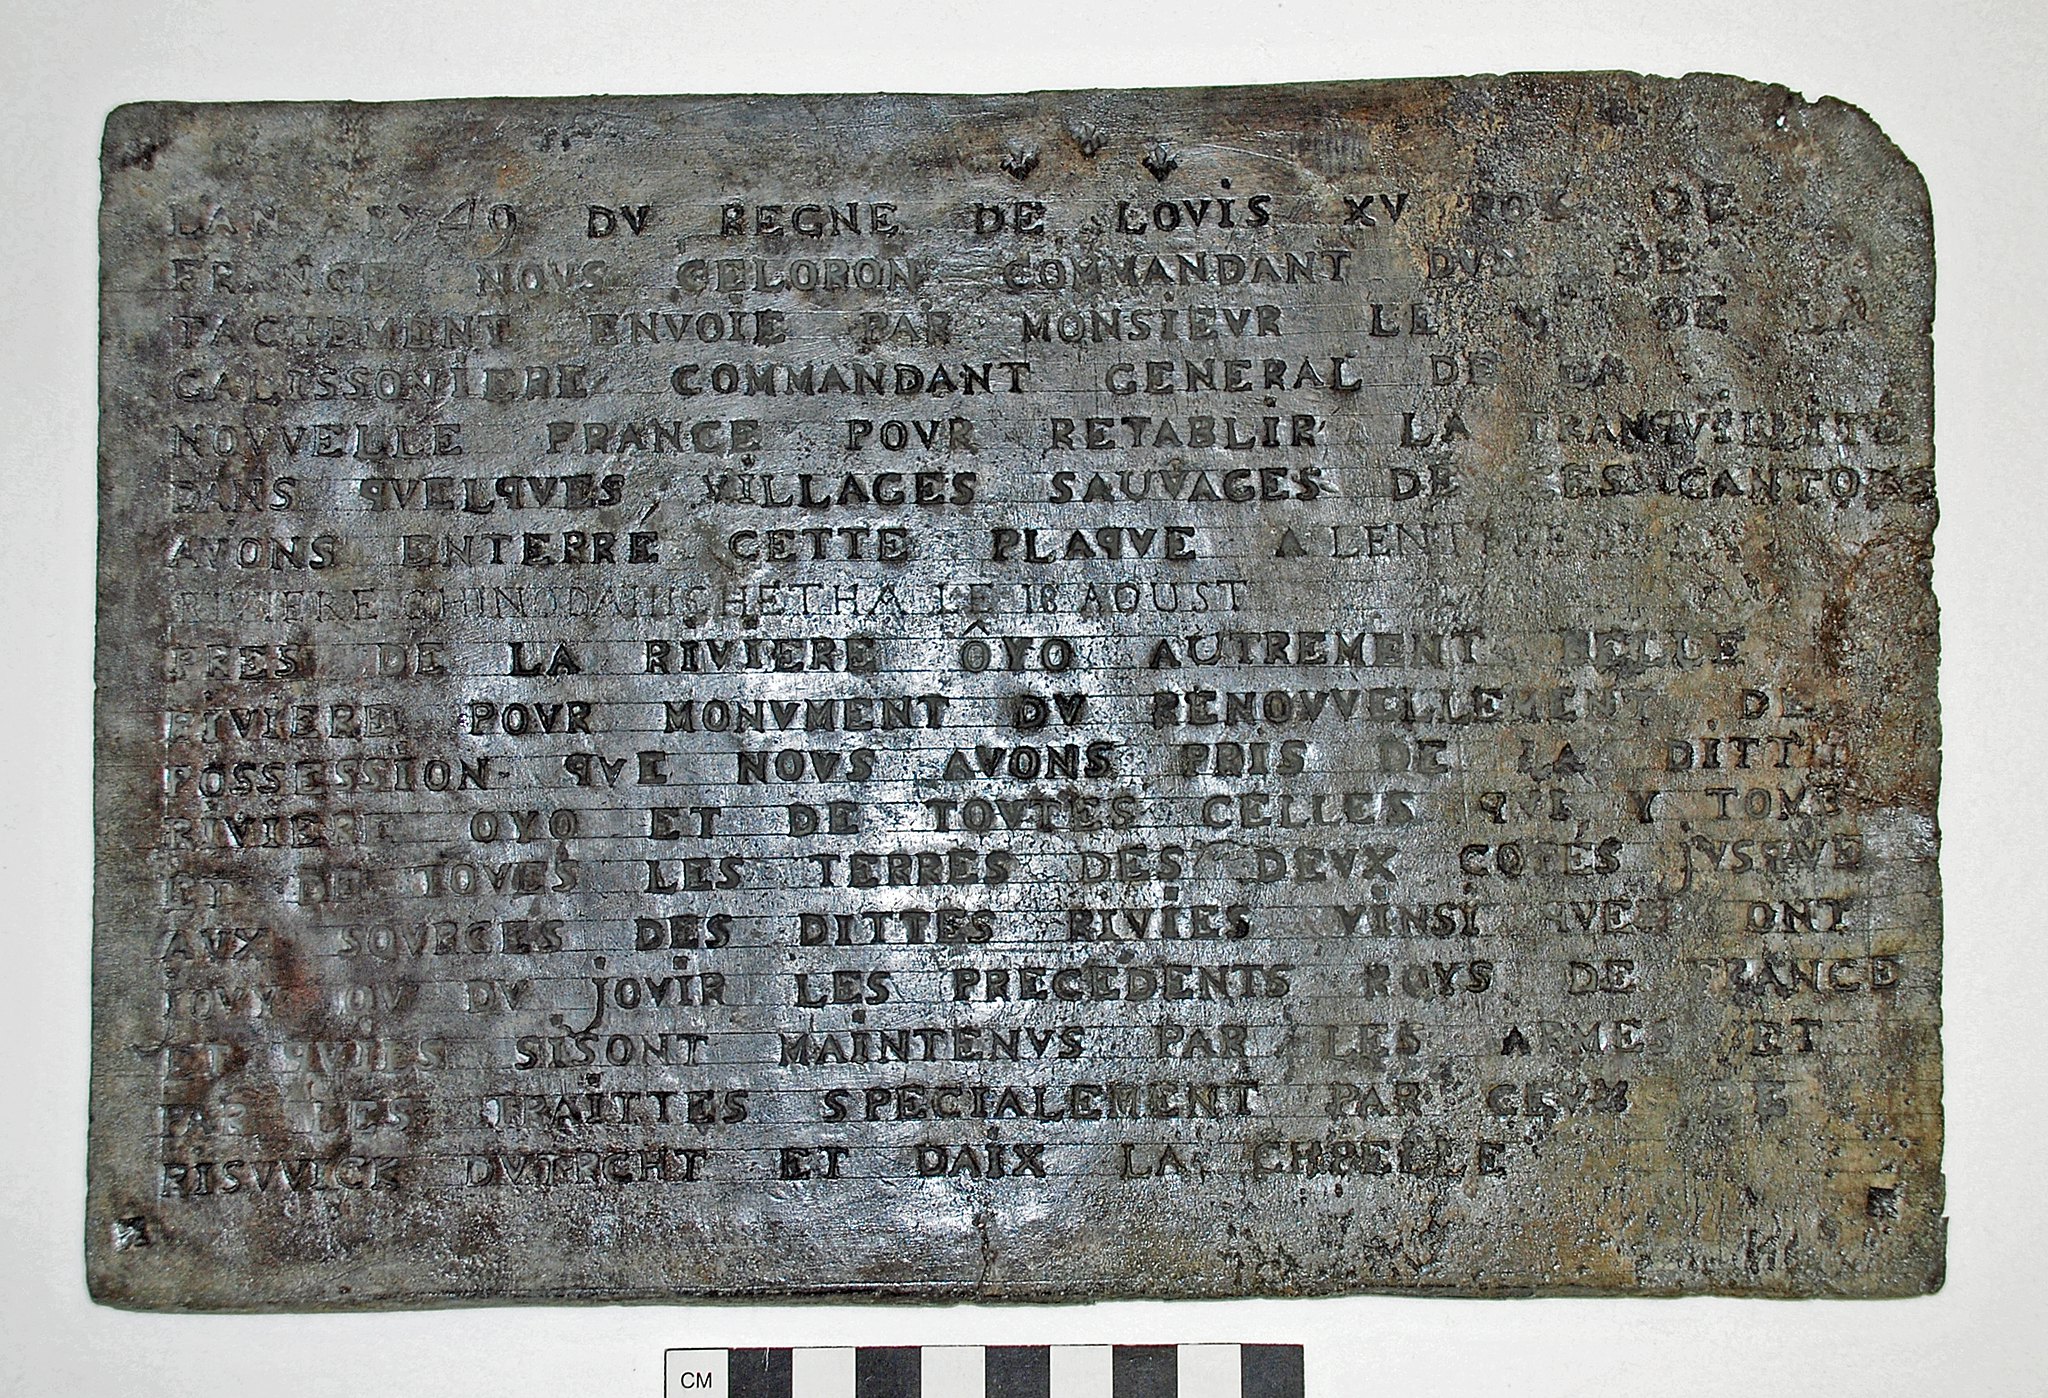 Virginia Historical Society: Céloron Plate, Lead Plaque Marking French Territory in Colonial Virginia; 1749